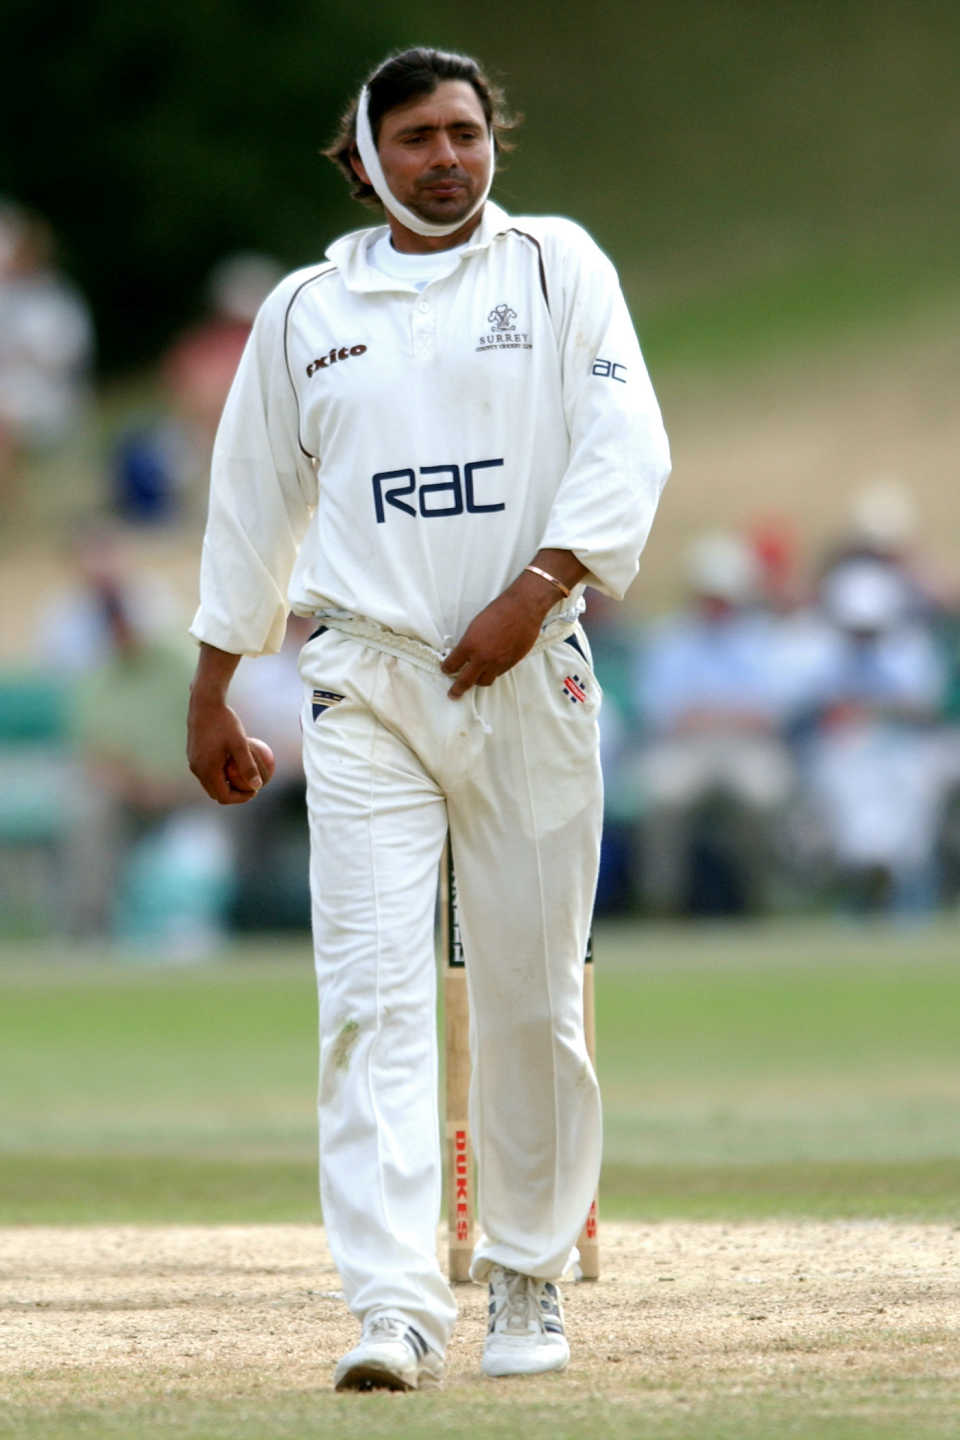 Saqlain Mushtaq attempts to intimidate the opposition with the positioning of his headband, Surrey v Nottinghamshire, County Championship Division One, Croydon, August 15, 2003